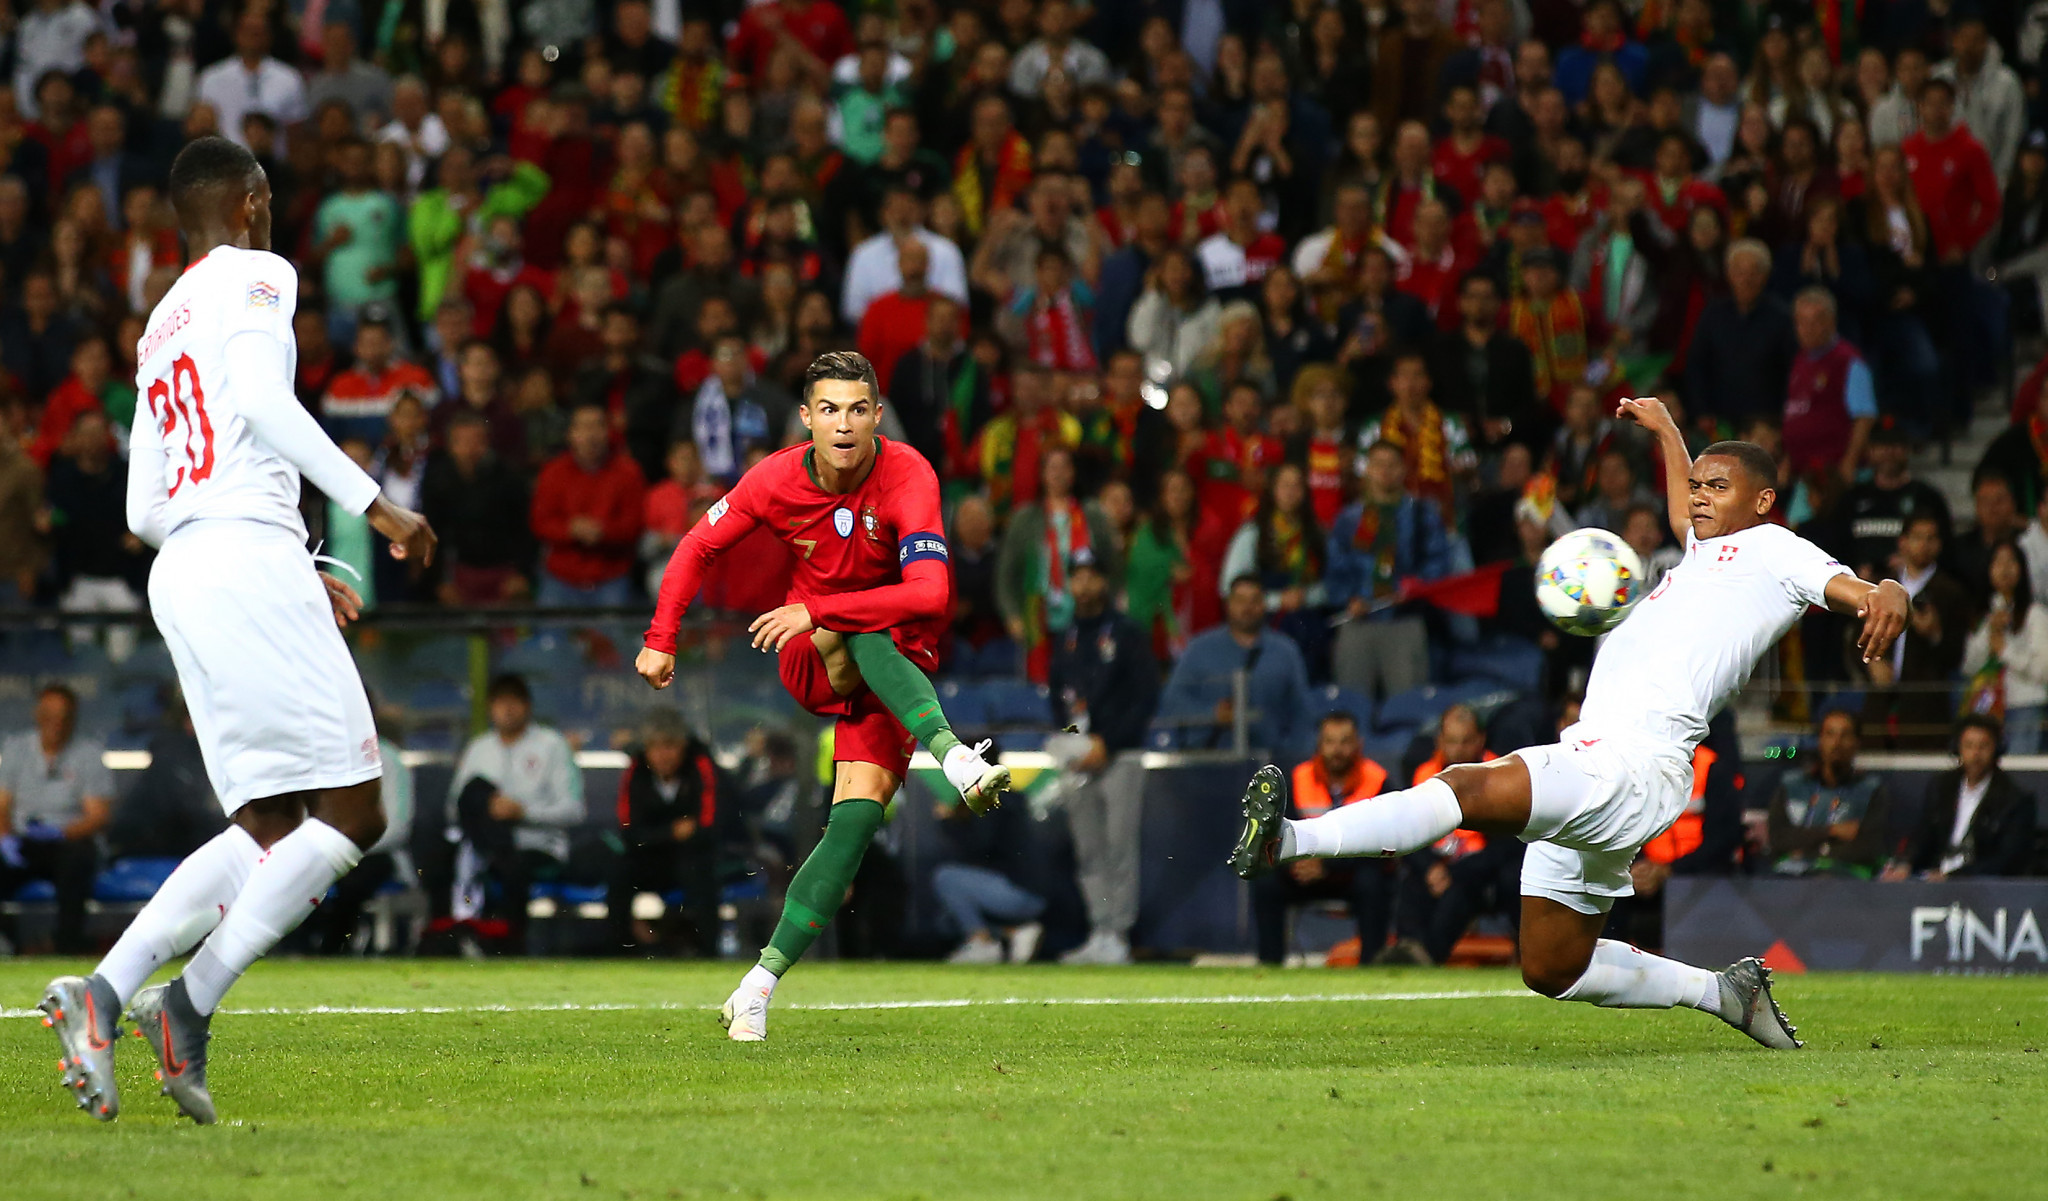 Cristiano Ronaldo scored a superb hat-trick to send Portugal through to the final ©Getty Images